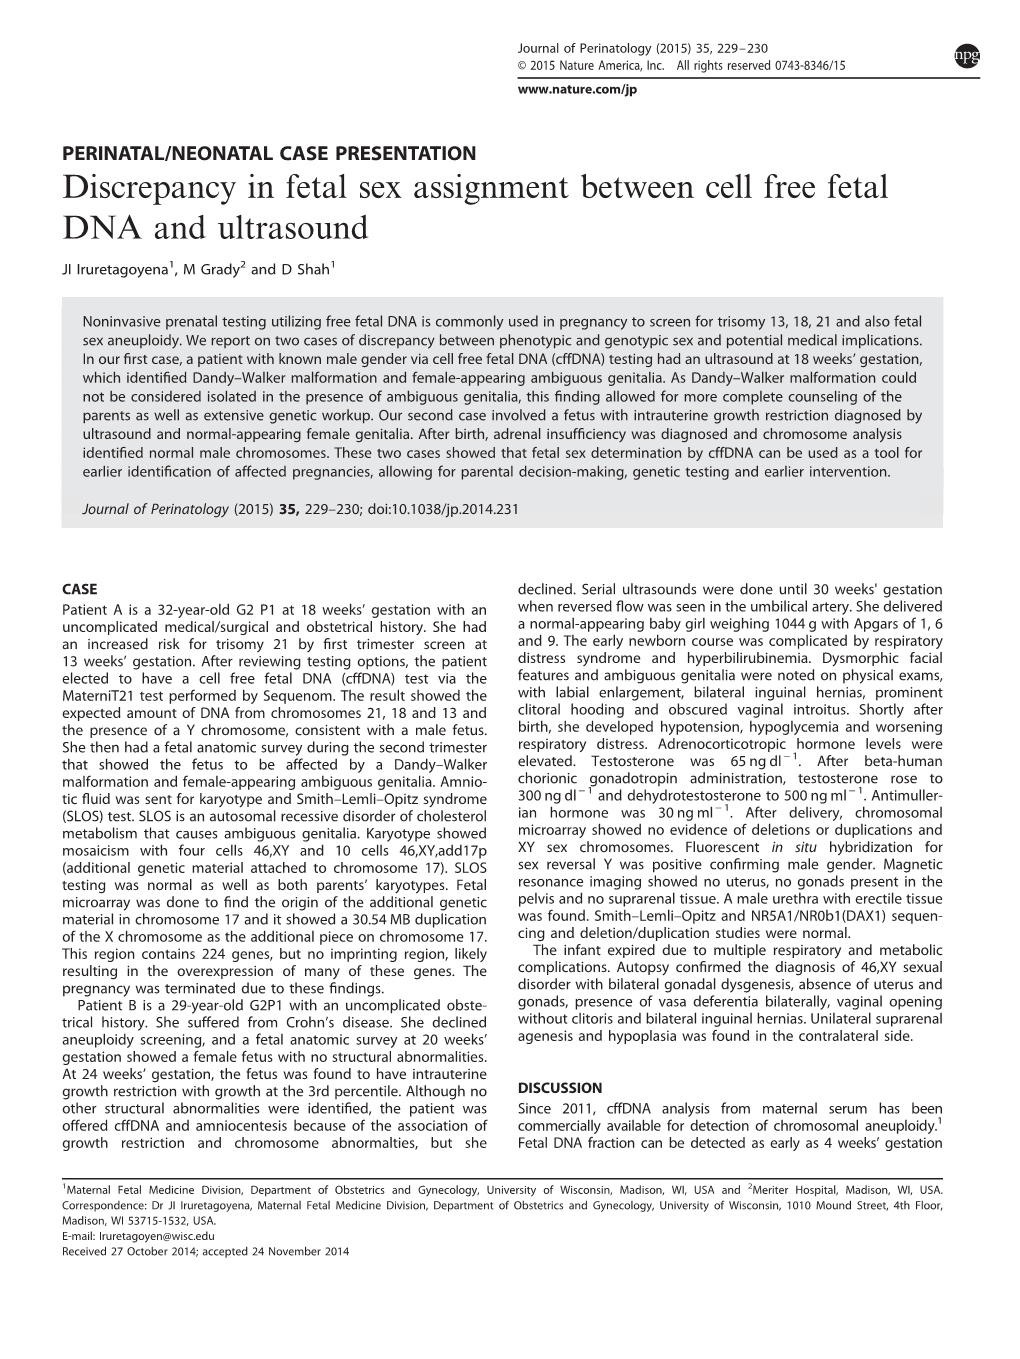 Discrepancy in Fetal Sex Assignment Between Cell Free Fetal DNA and Ultrasound